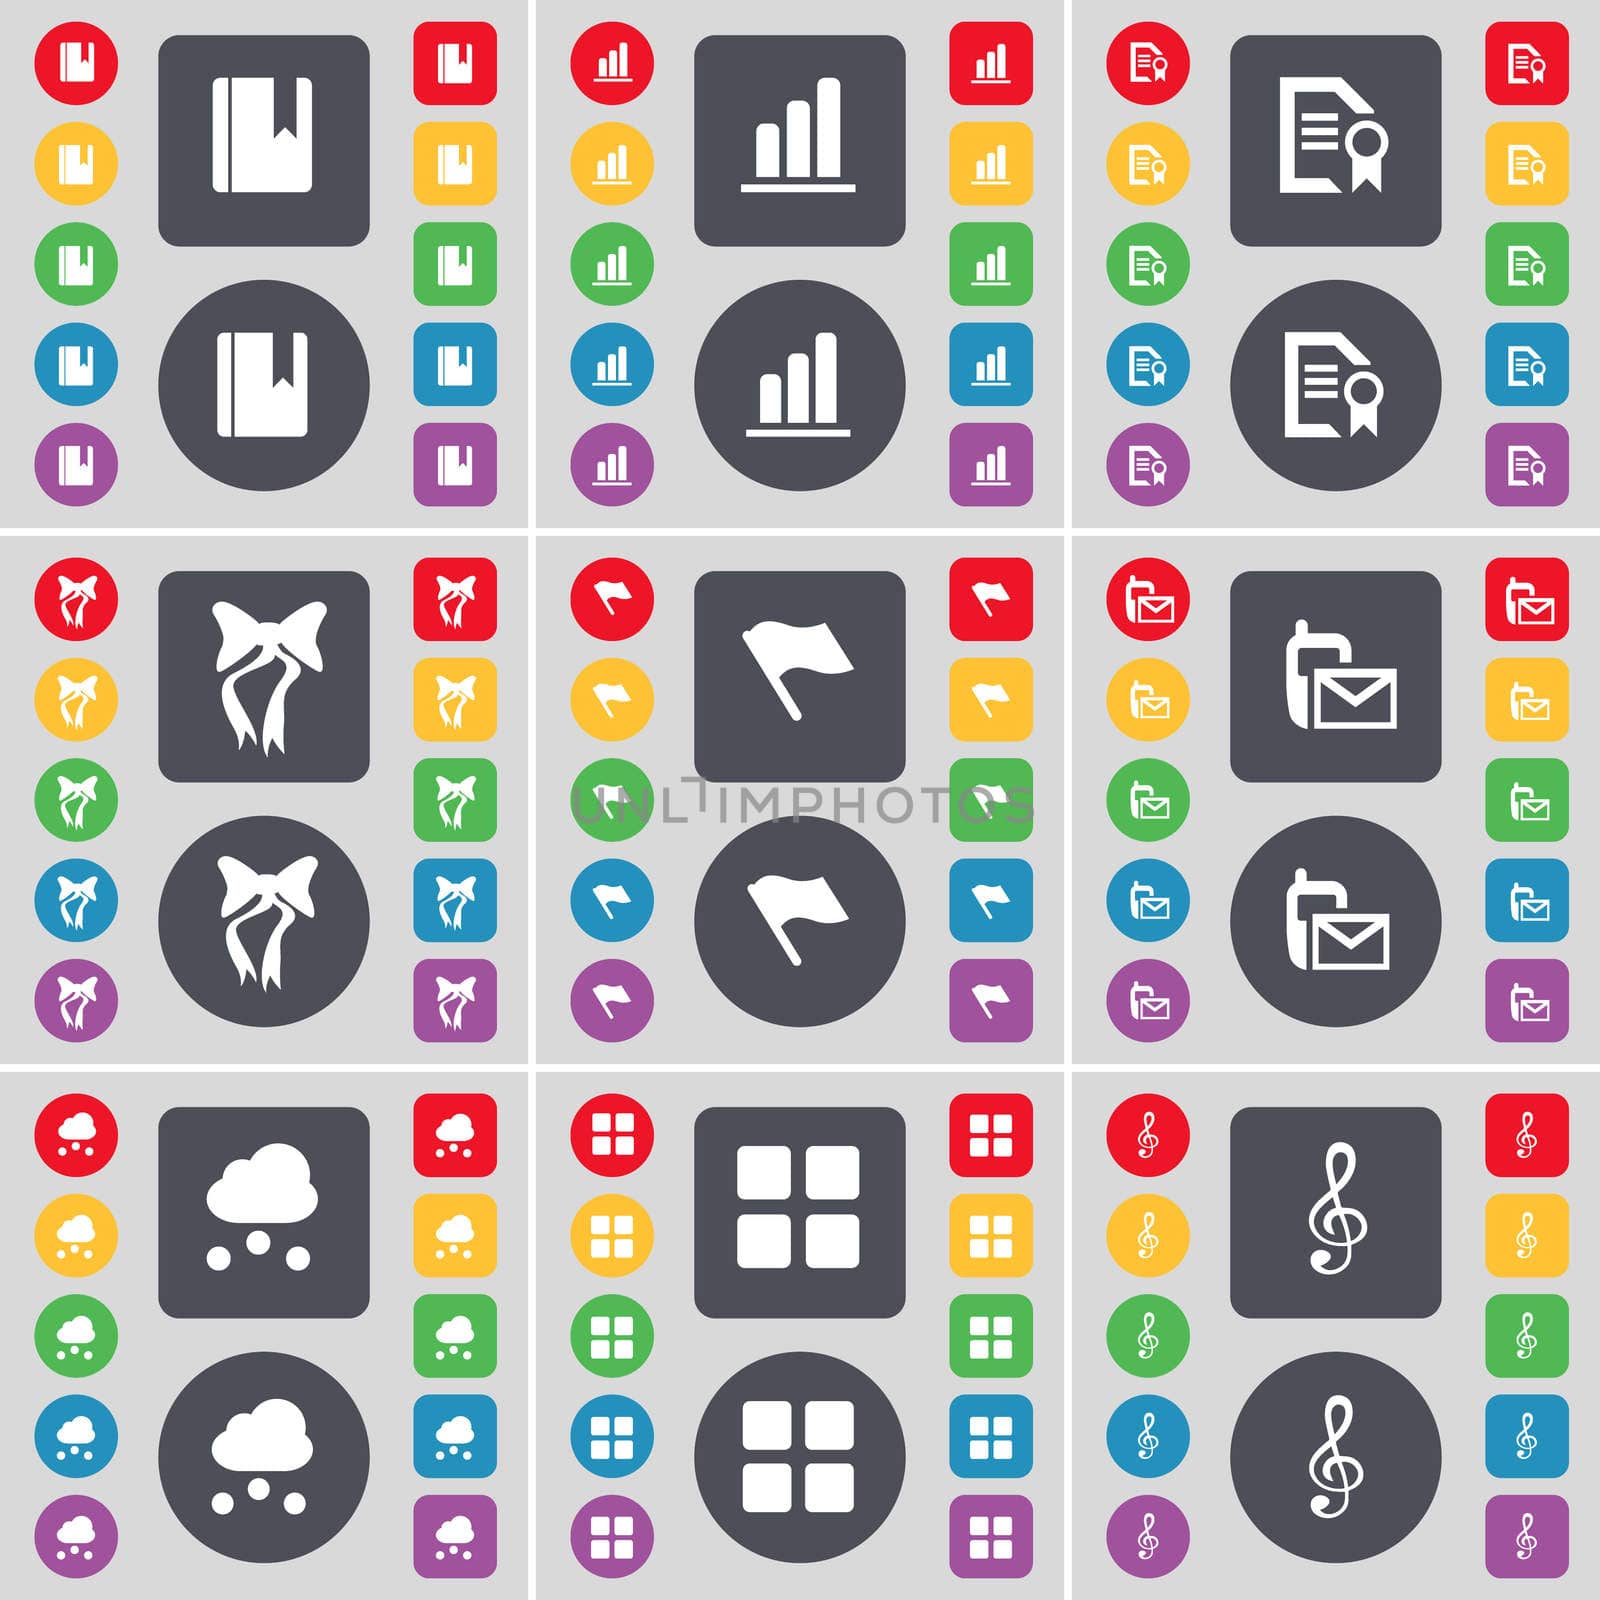 Dictionary, Diagram, Text file, Bow, Flag, SMS, Cloud, Apps, Clef icon symbol. A large set of flat, colored buttons for your design. illustration